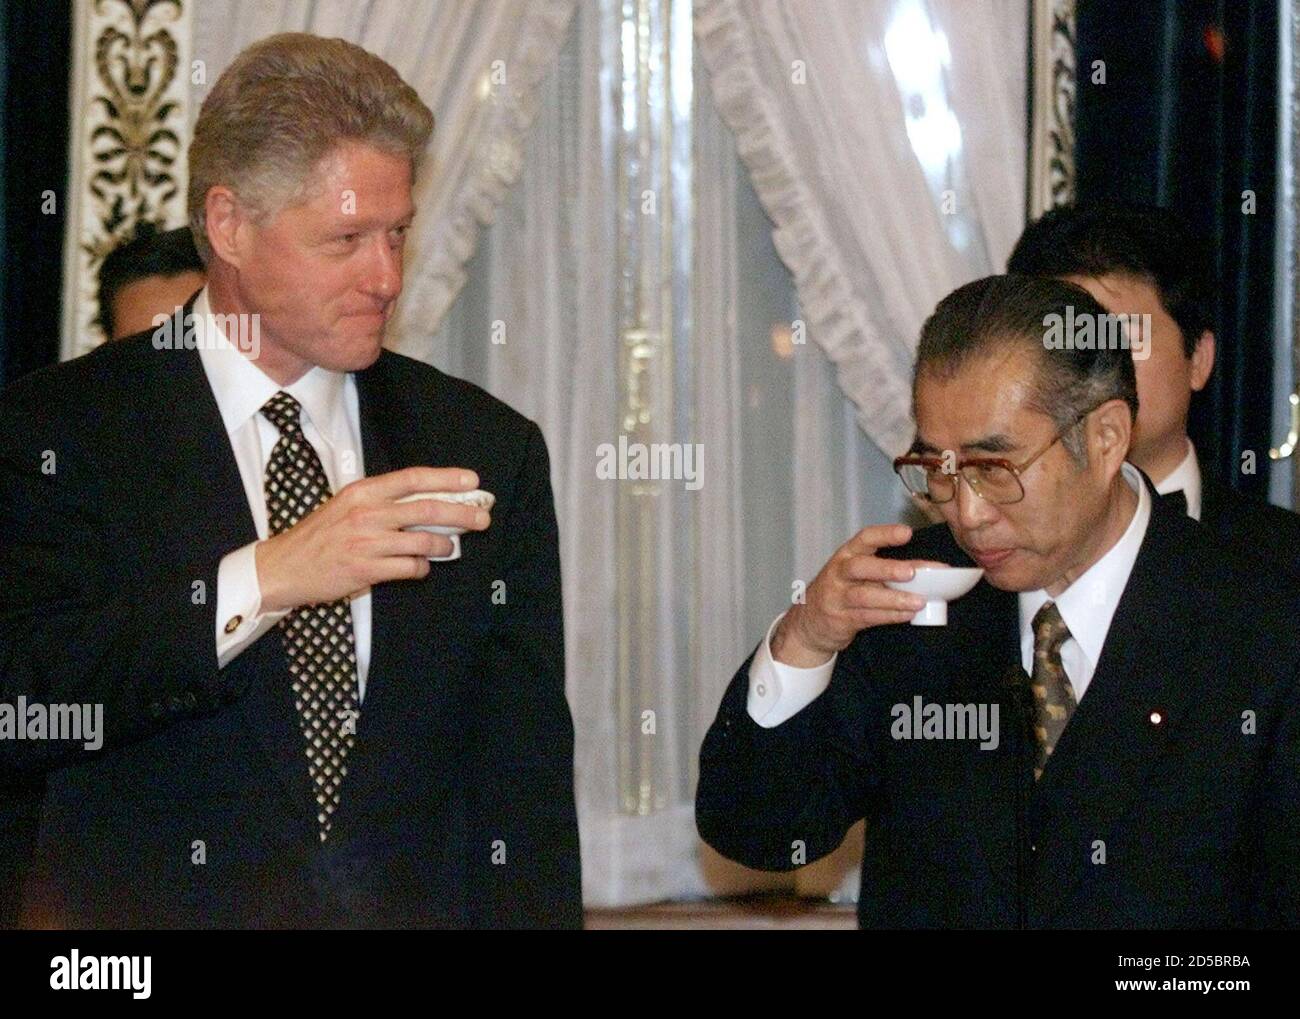 U.S. President Bill Clinton toasts Japanese Prime Minister Keizo Obuchi at  the start of a dinner at the Akasaka Palace in Tokyo November 19. The  president praised the close ties between the